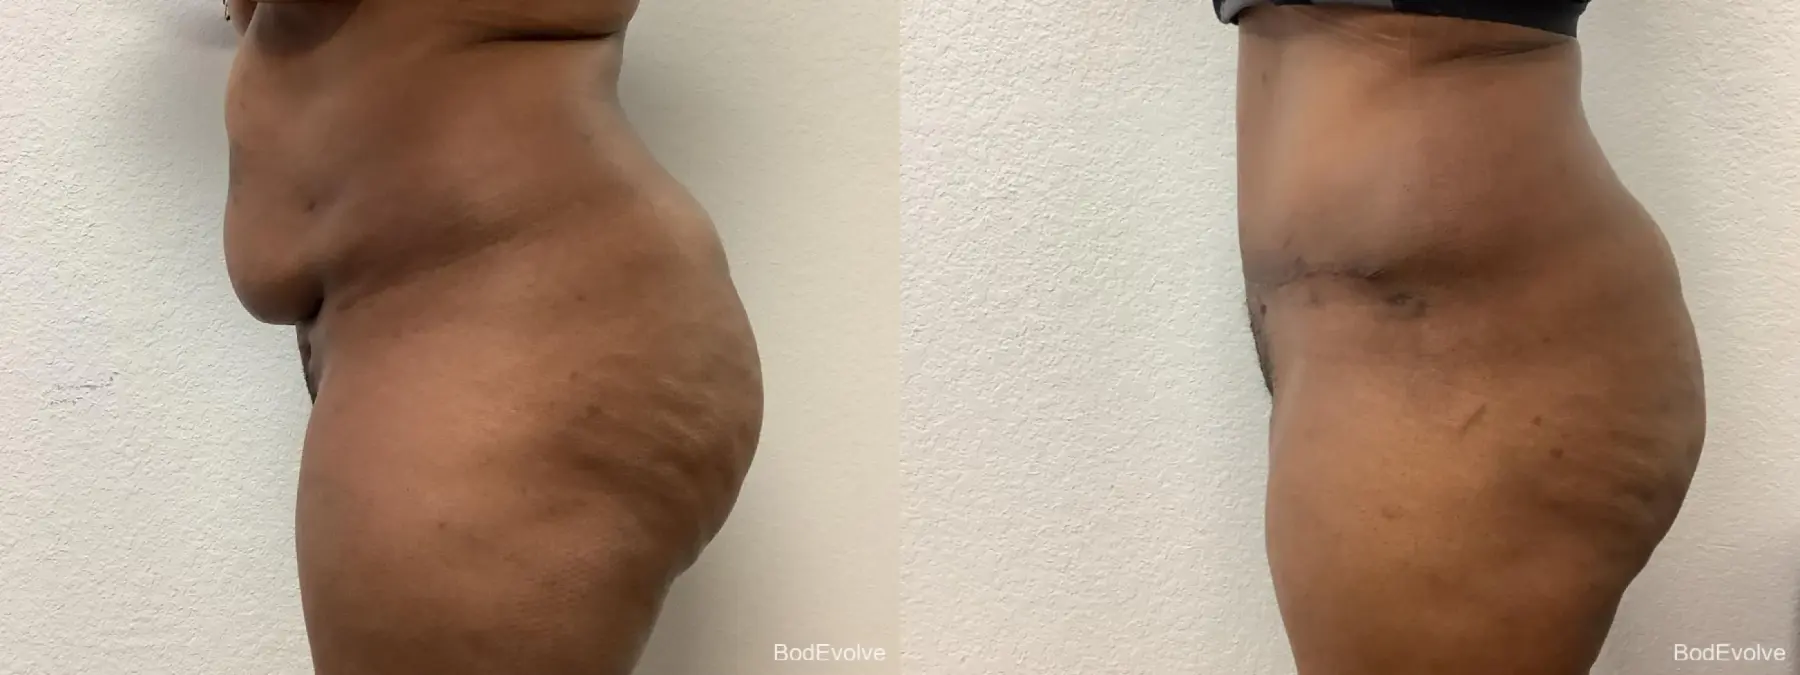 Tummy Tuck: Patient 3 - Before and After 4